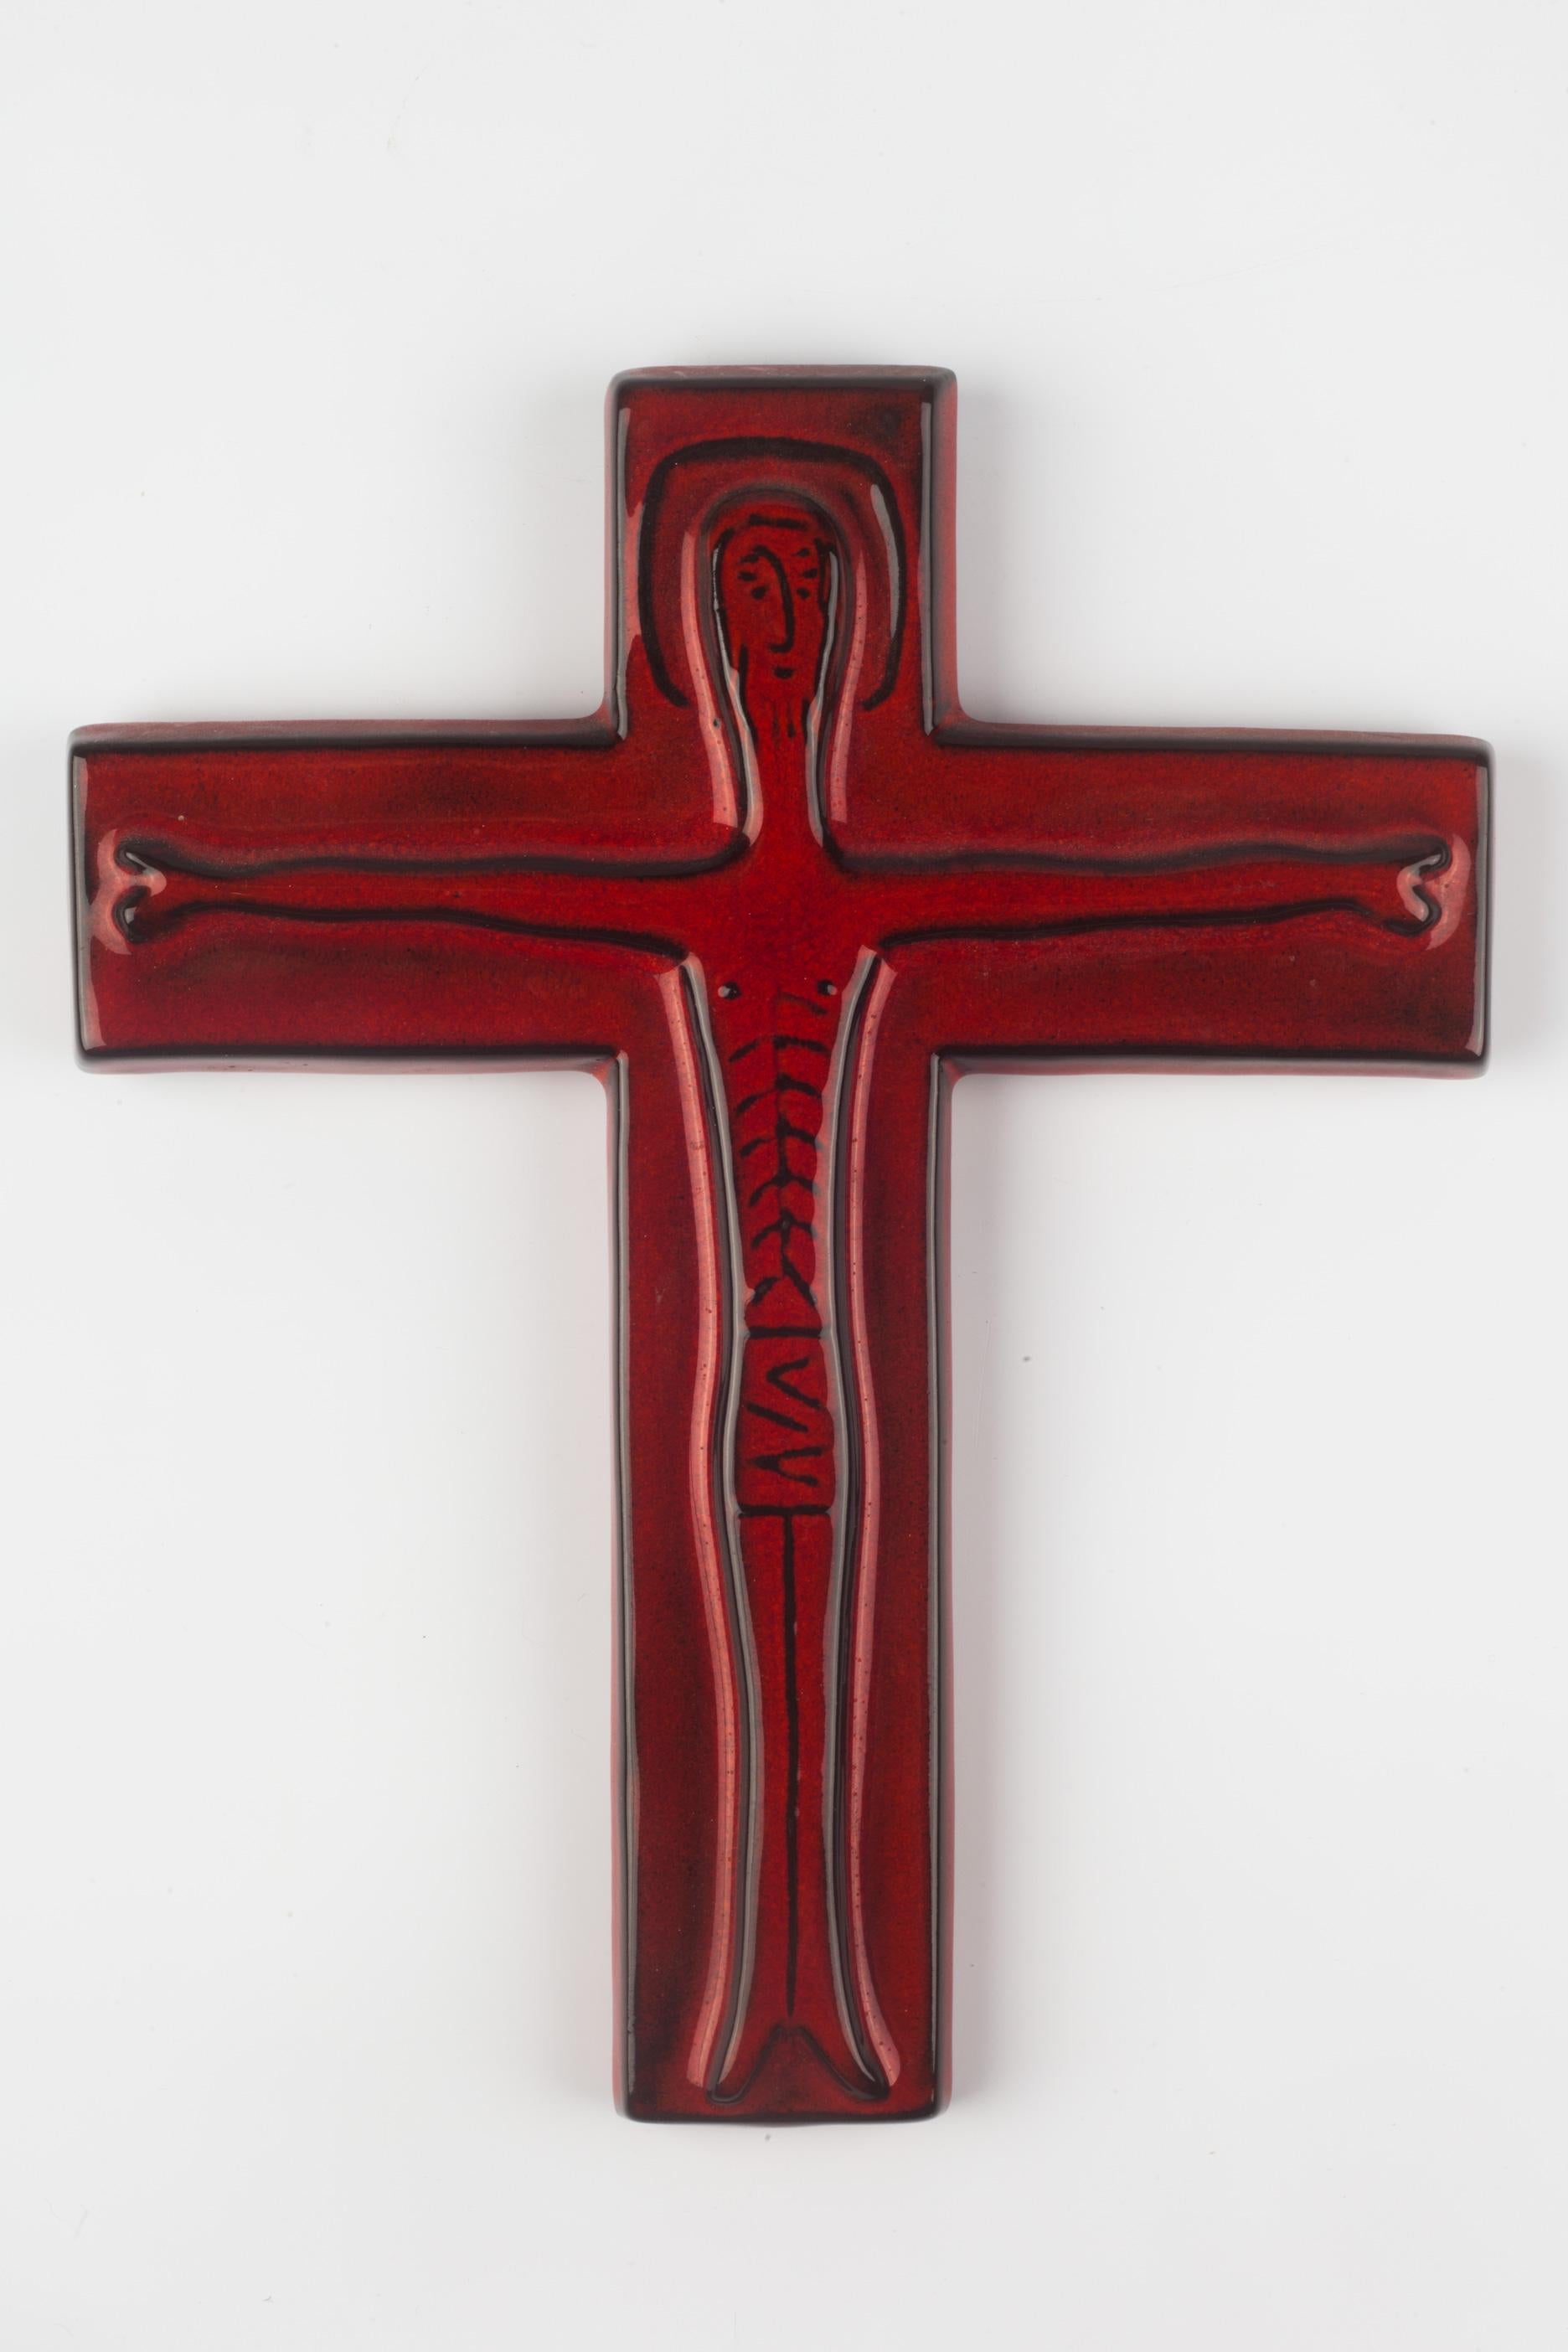 European crucifix in red and black, handmade by ceramic artisans in the 1970s. Hand-painted in deep red with black contours. Minimal illustrated Christ figure. Finished in high-gloss glaze.

Dimensions
H 8.25 in. x W 6.63 in. x D .63 in.
H 20.96